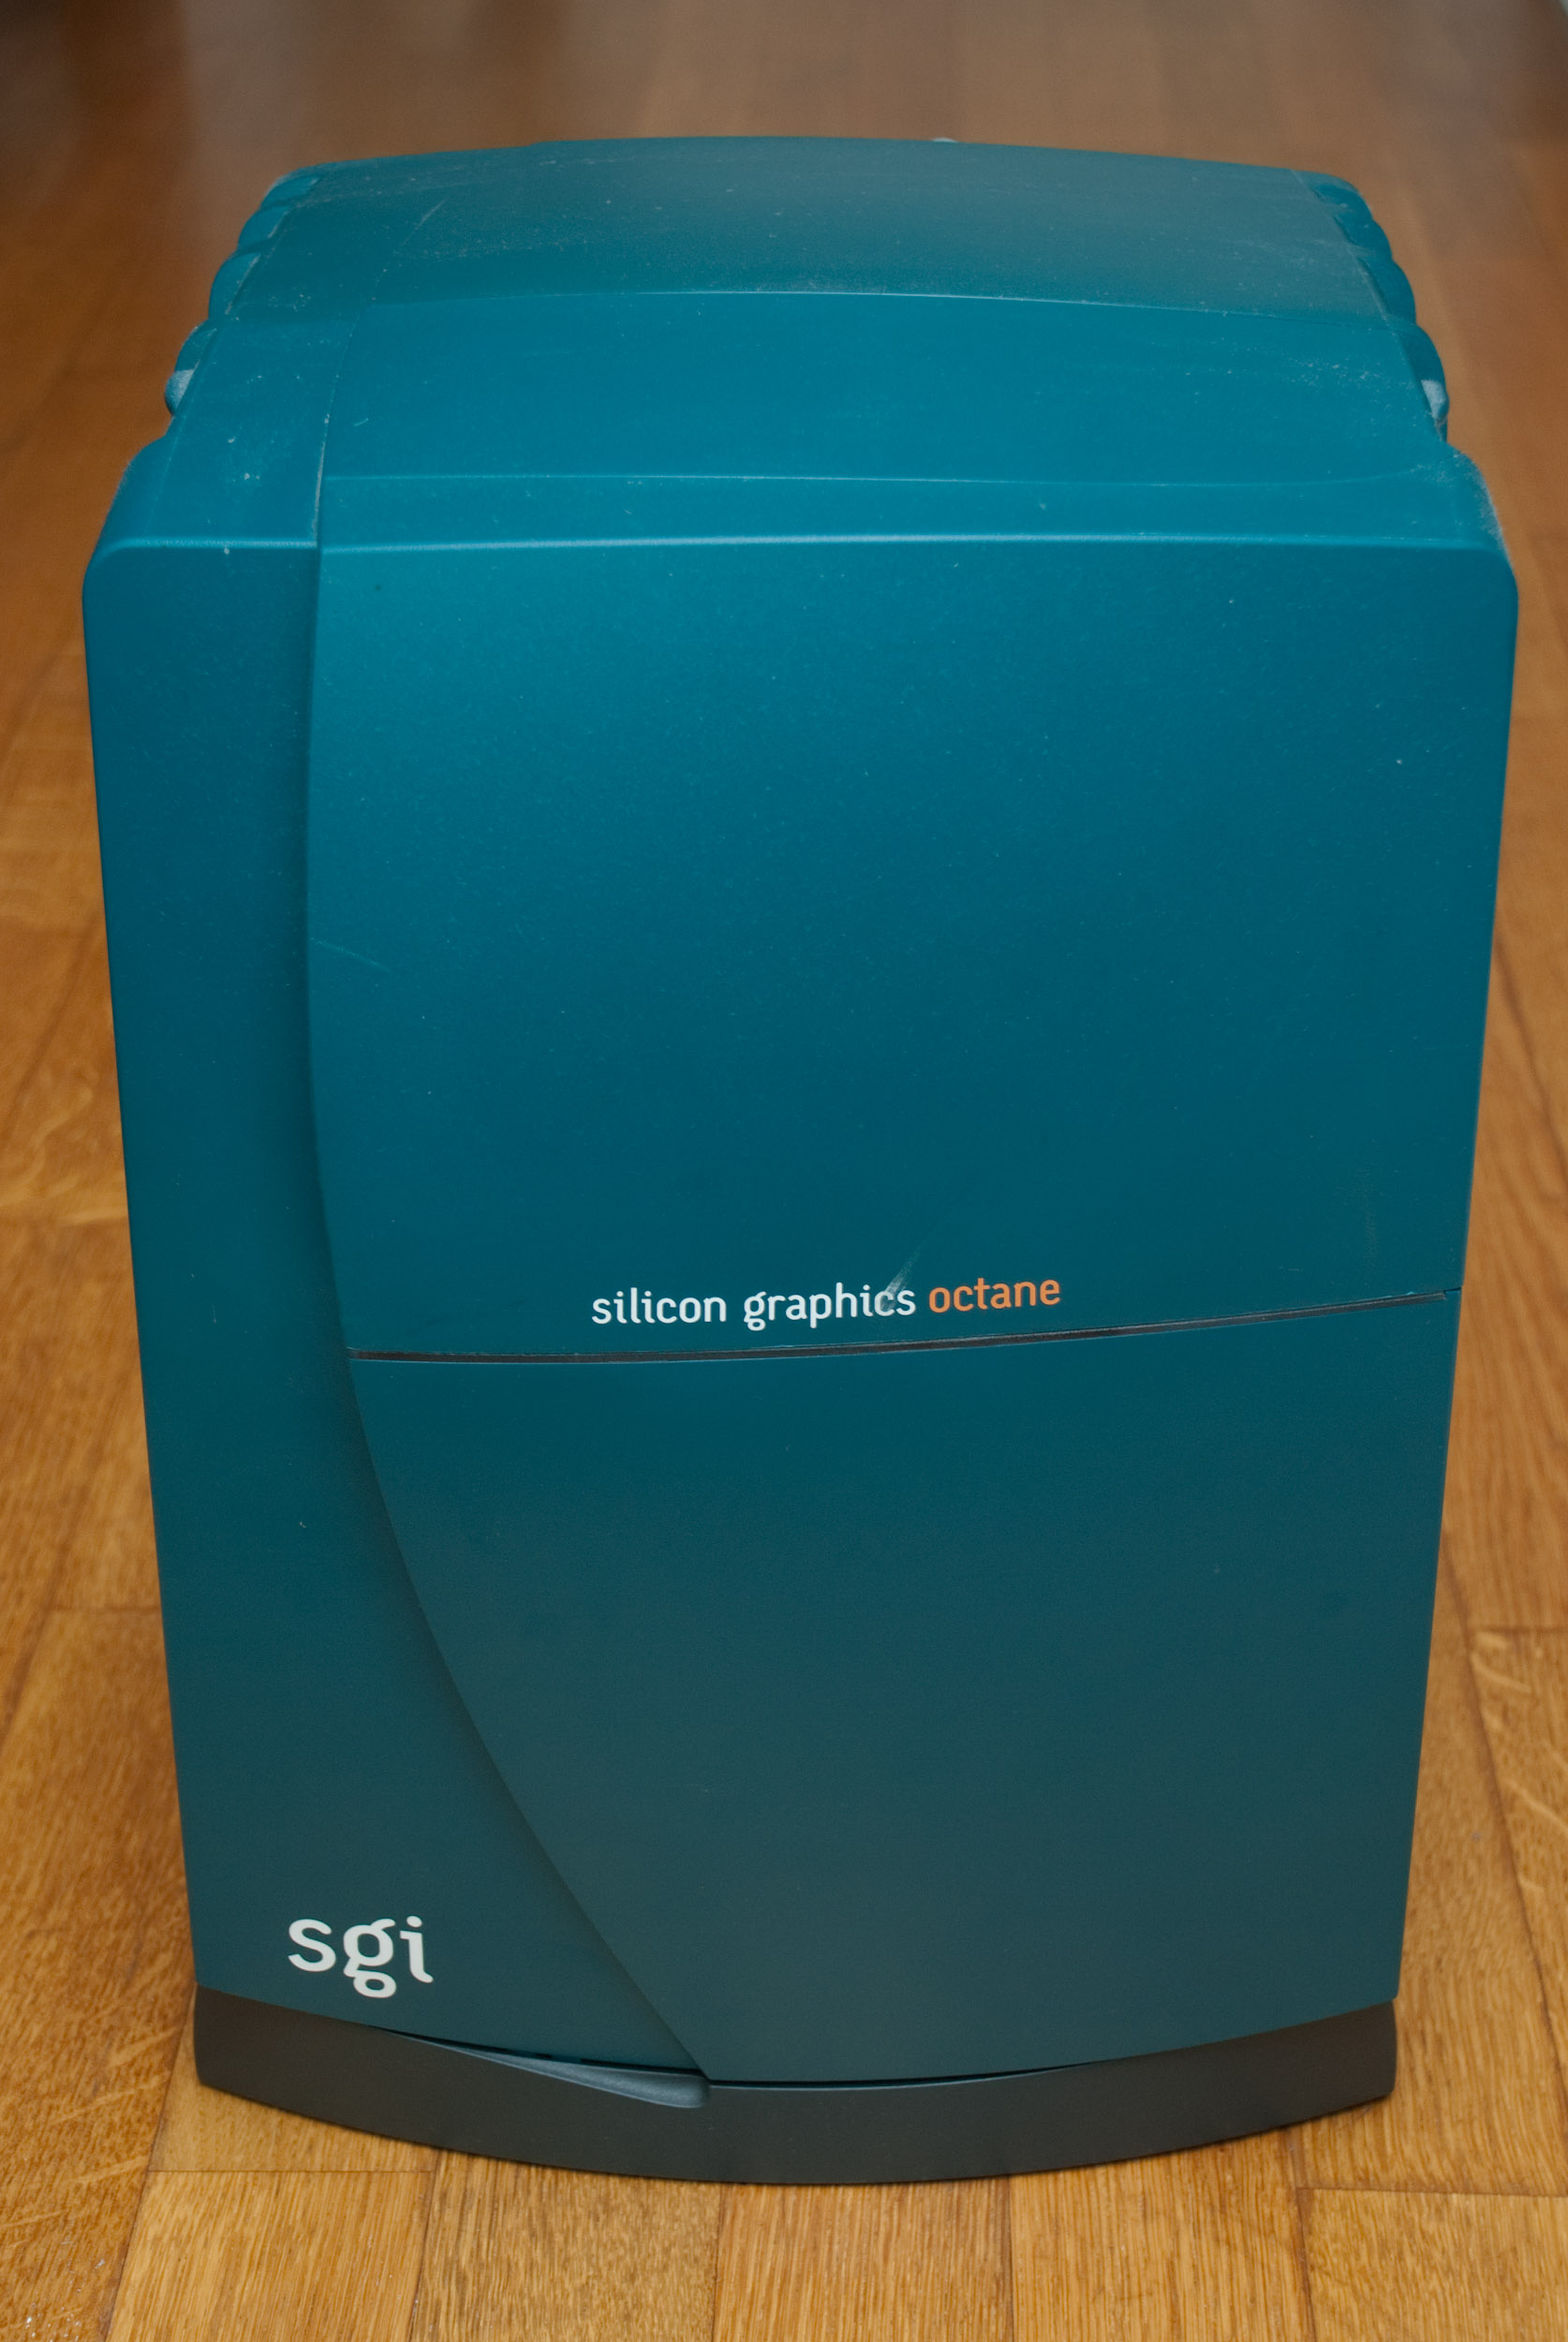 SGI Octane2 030-1241-002 Graphics Video Board Card Octane 2 Silicon Graphics for sale online 